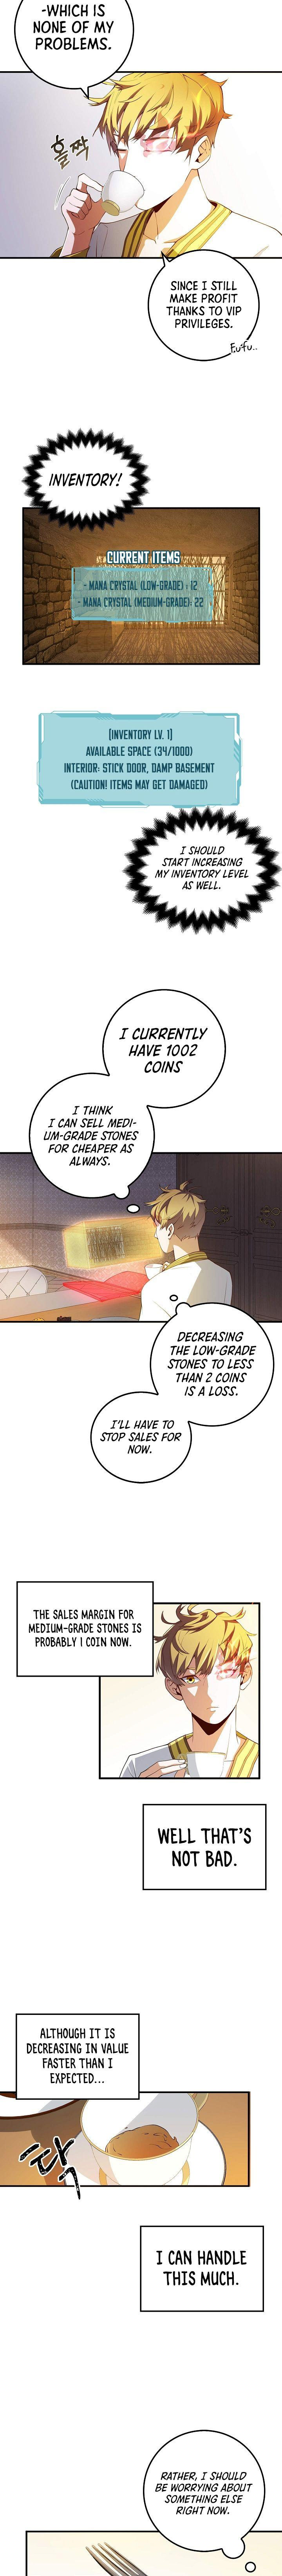 The Lord’s Coins Aren’t Decreasing?! - Chapter 10 Page 3